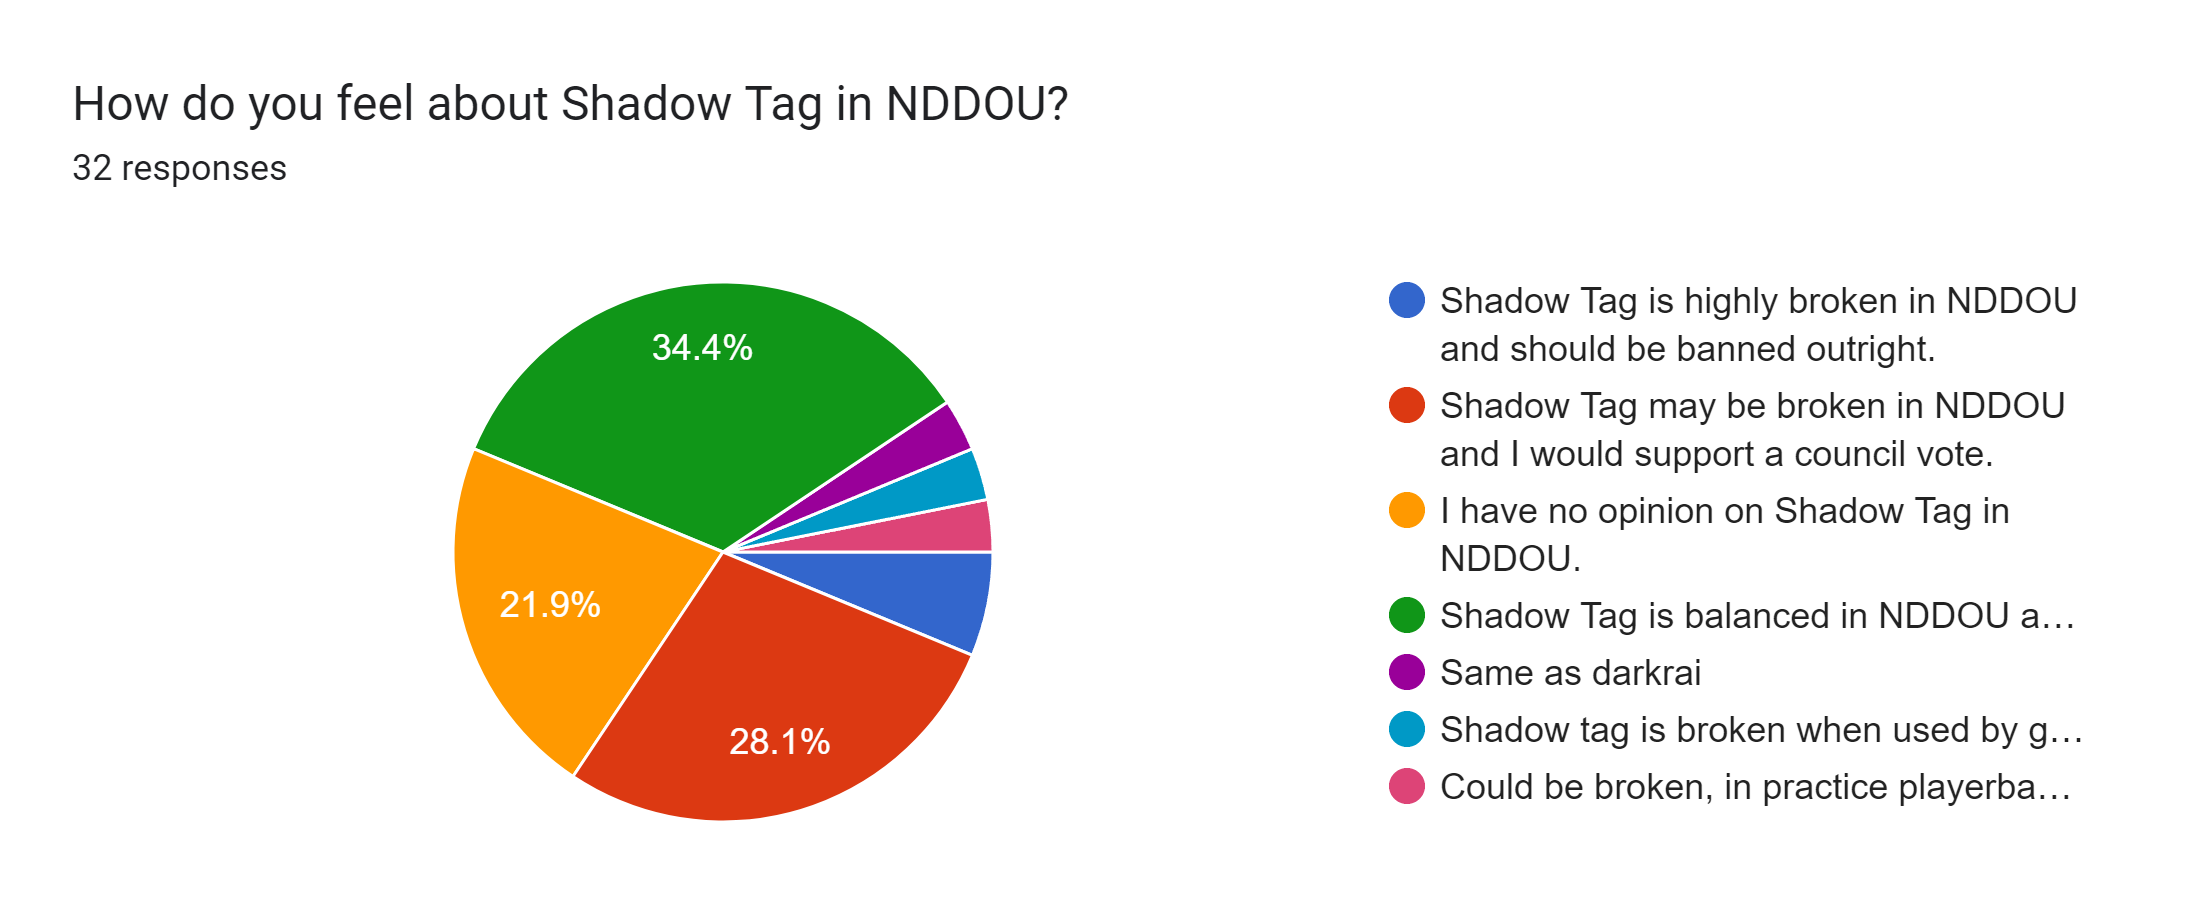 Forms response chart. Question title: How do you feel about Shadow Tag in NDDOU?. Number of responses: 32 responses.